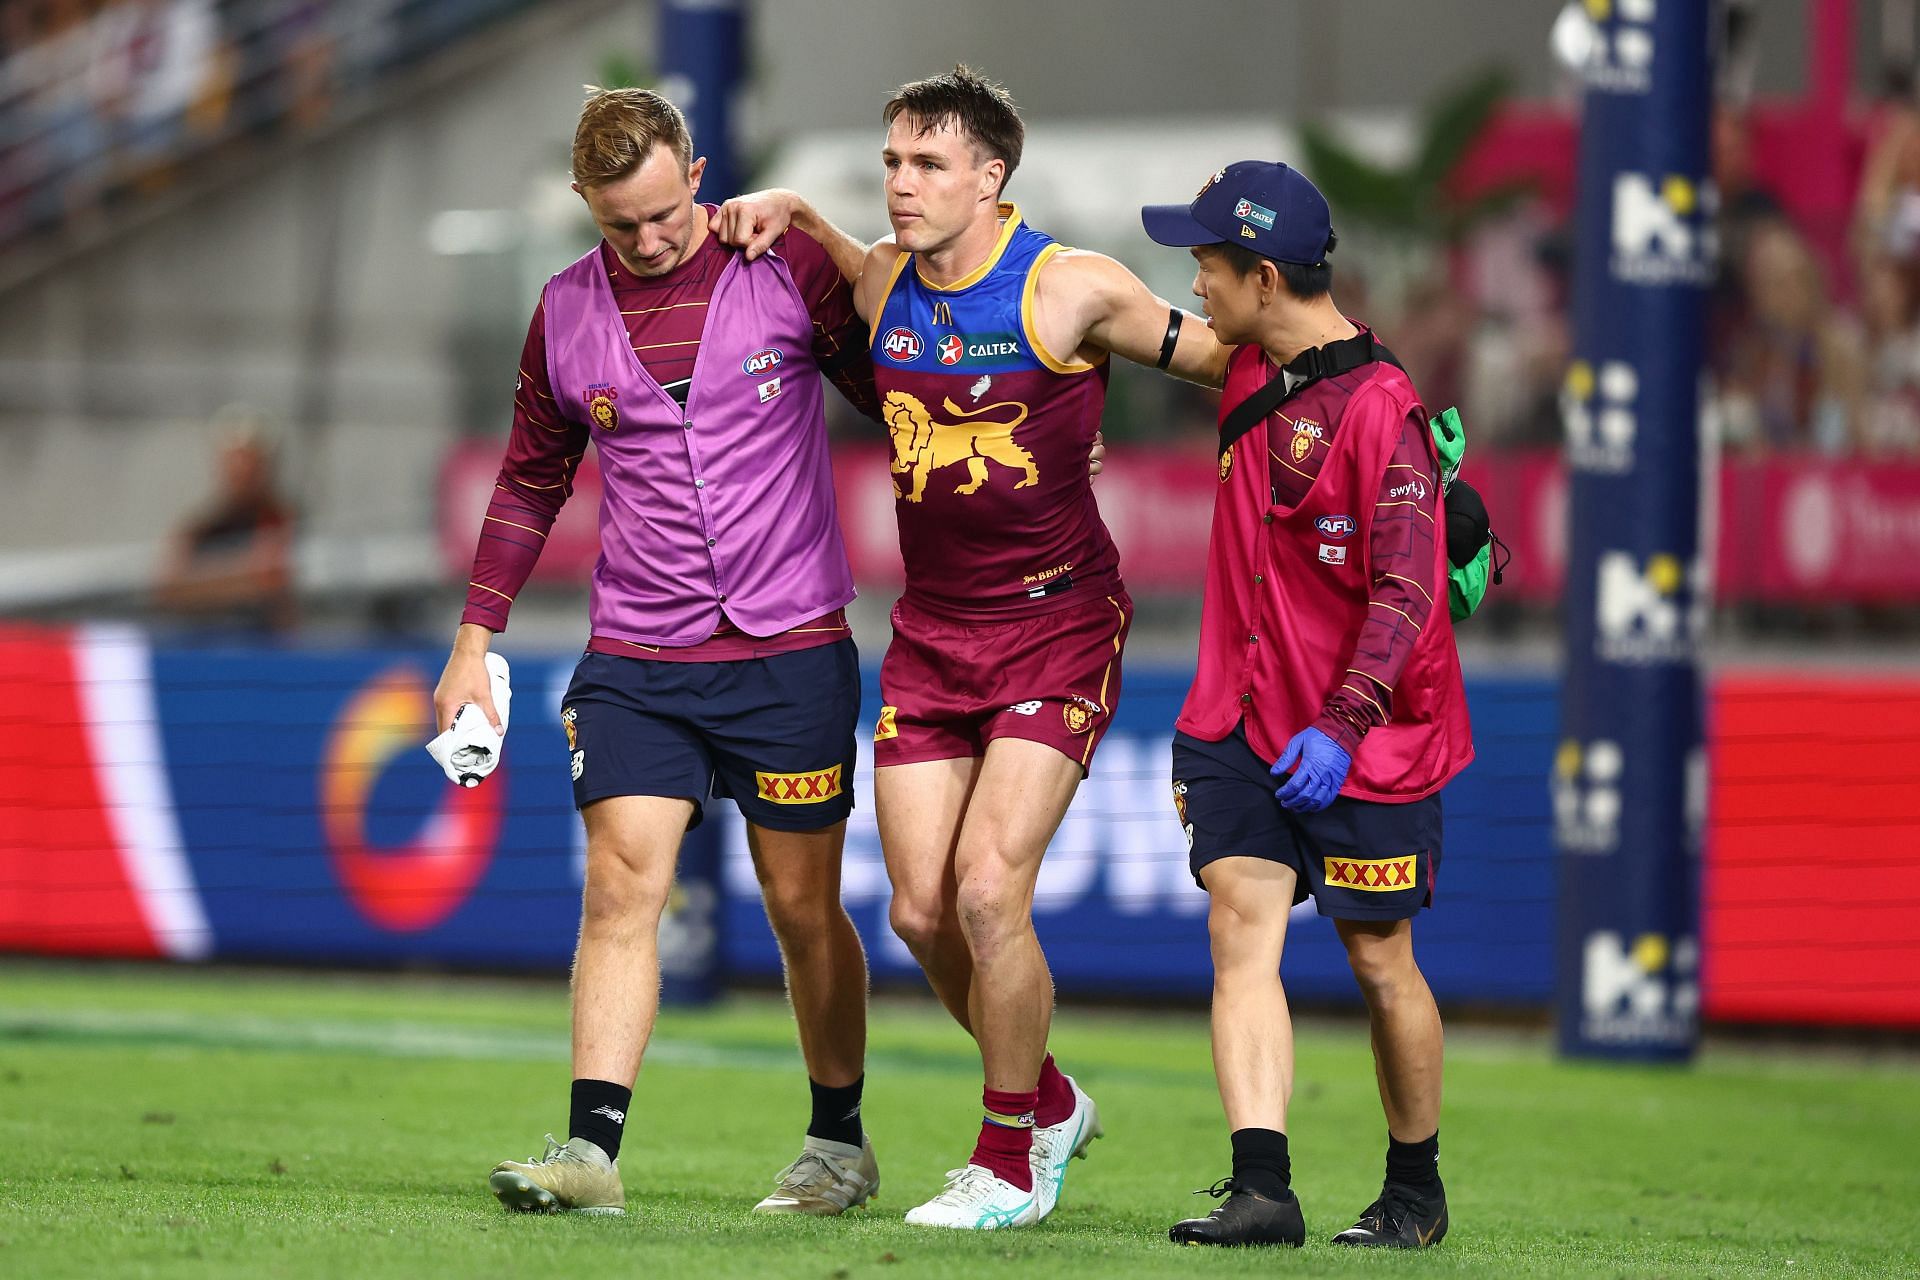 Lincoln McCarthy of the Lions is injured during the round eight AFL match between Brisbane Lions and Gold Coast Suns